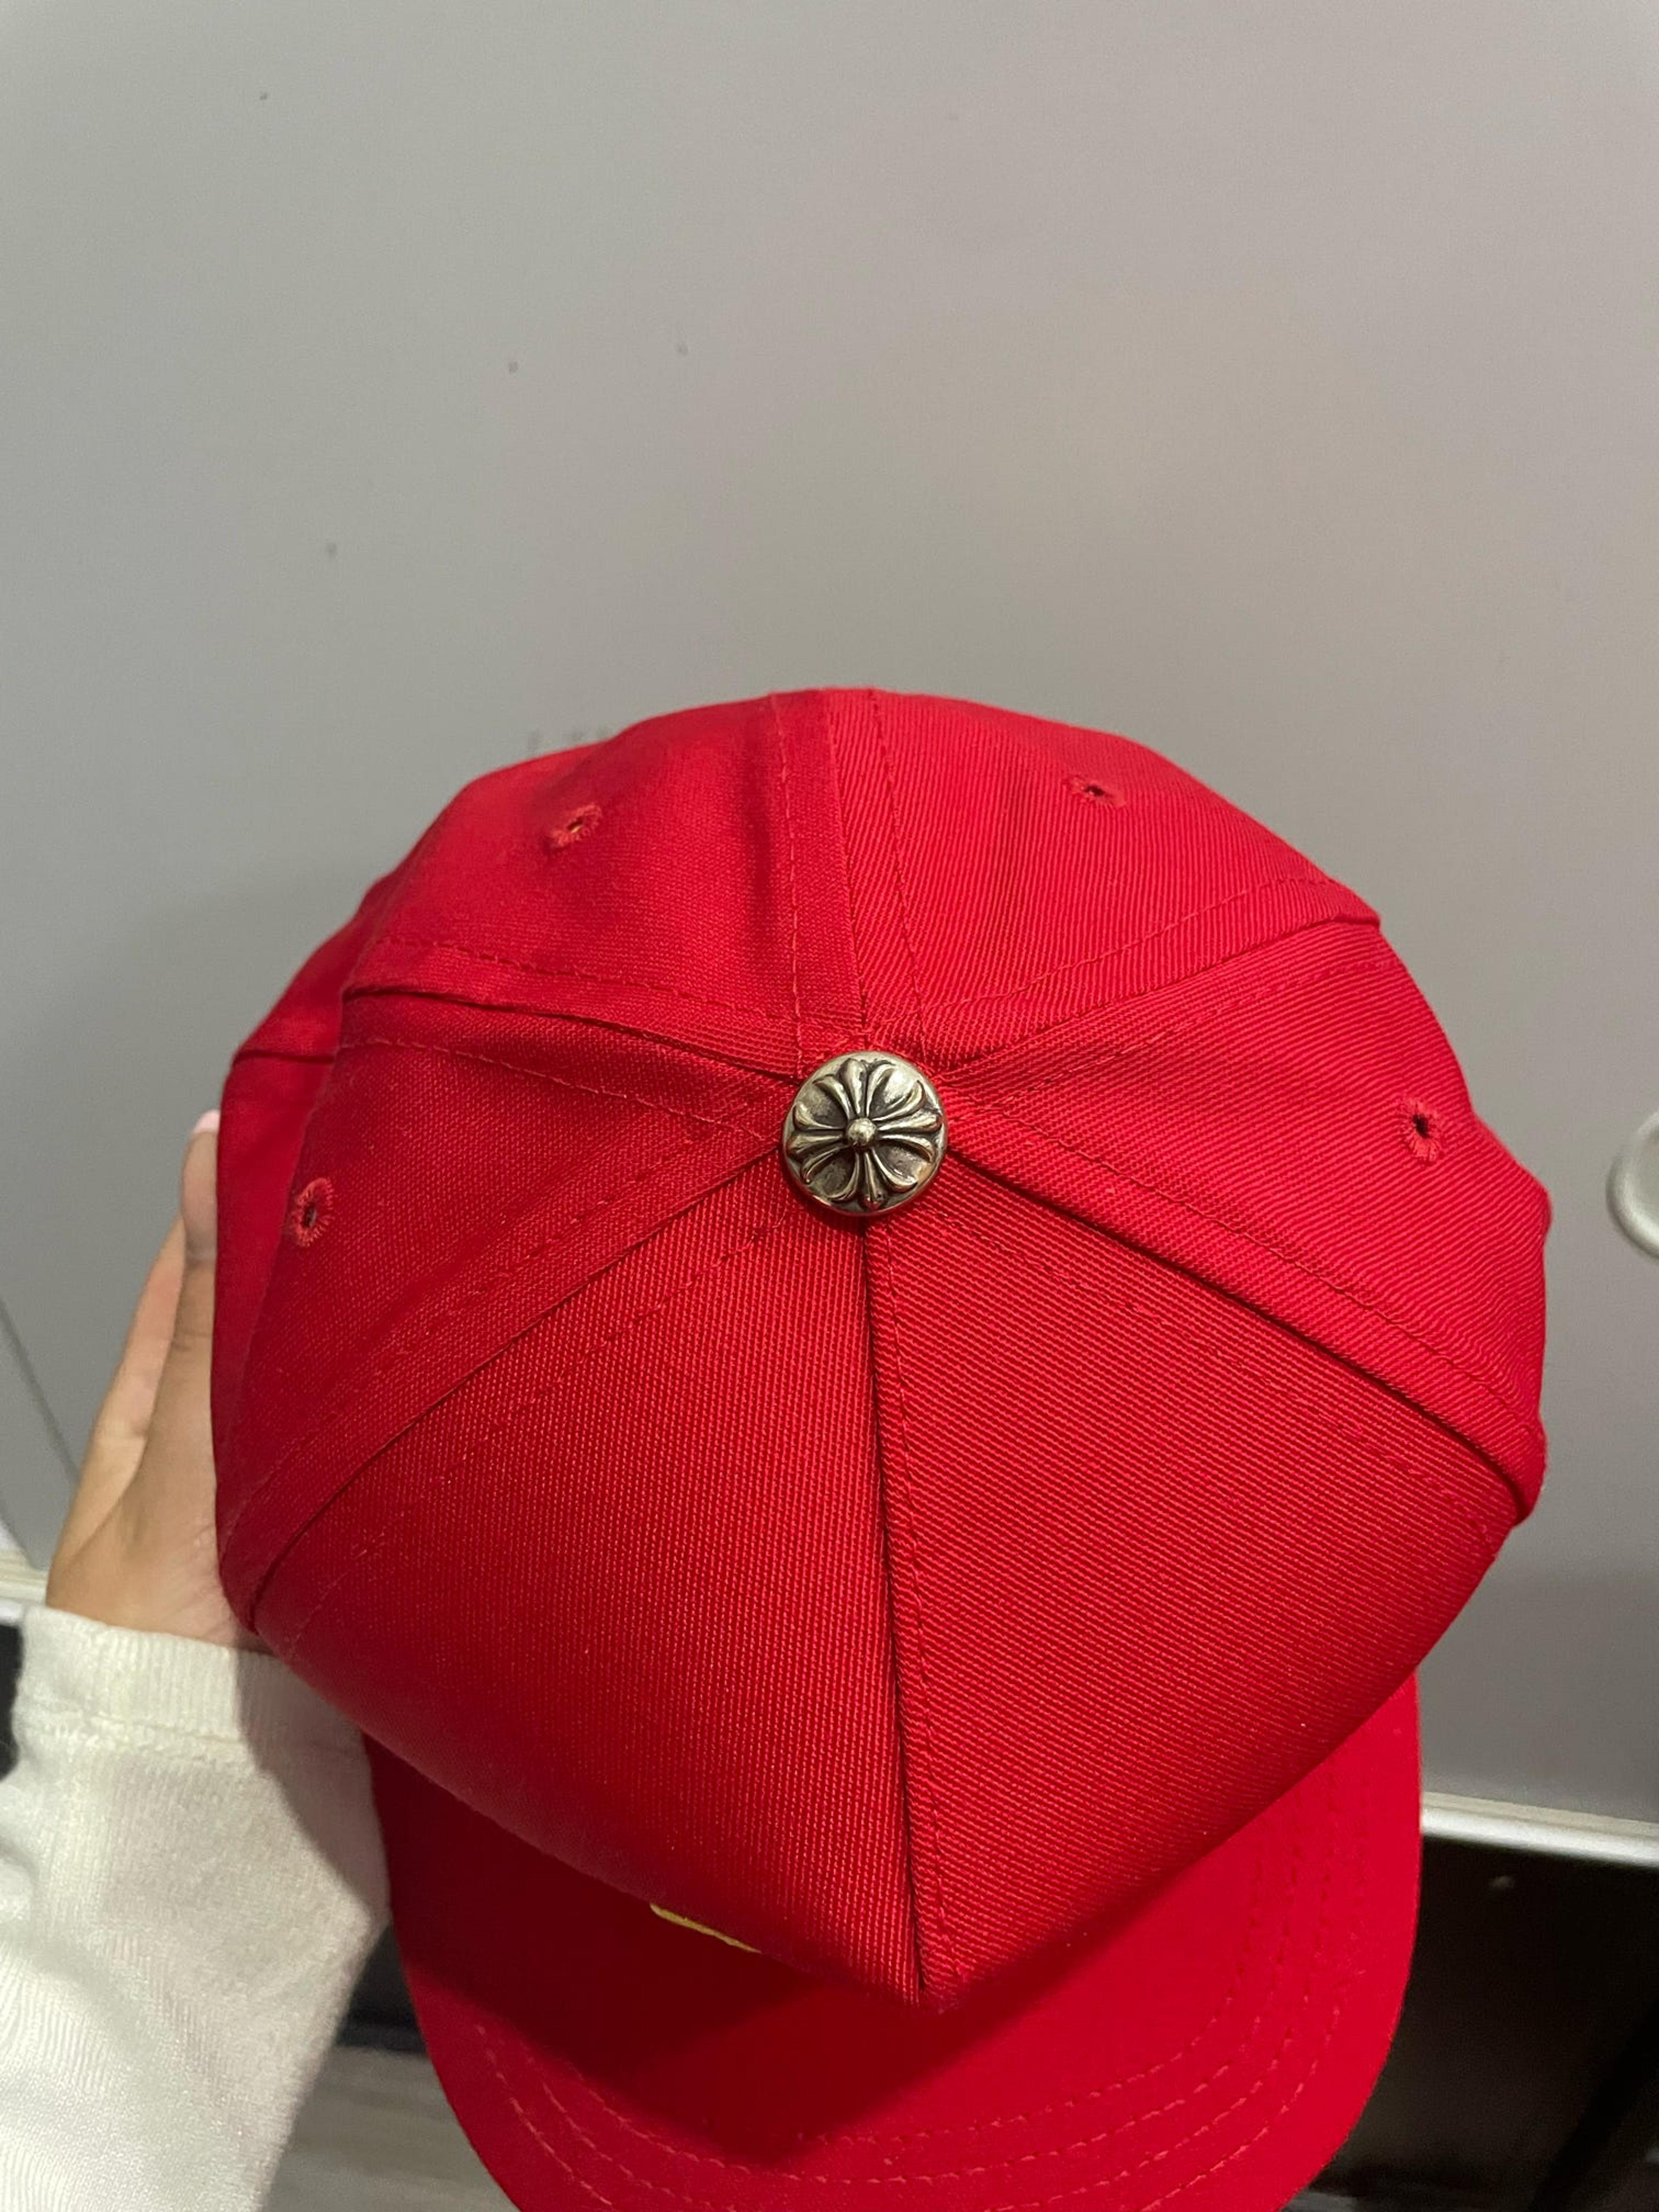 NTWRK - Chrome Hearts CH Silver Button Hat Red / Yellow